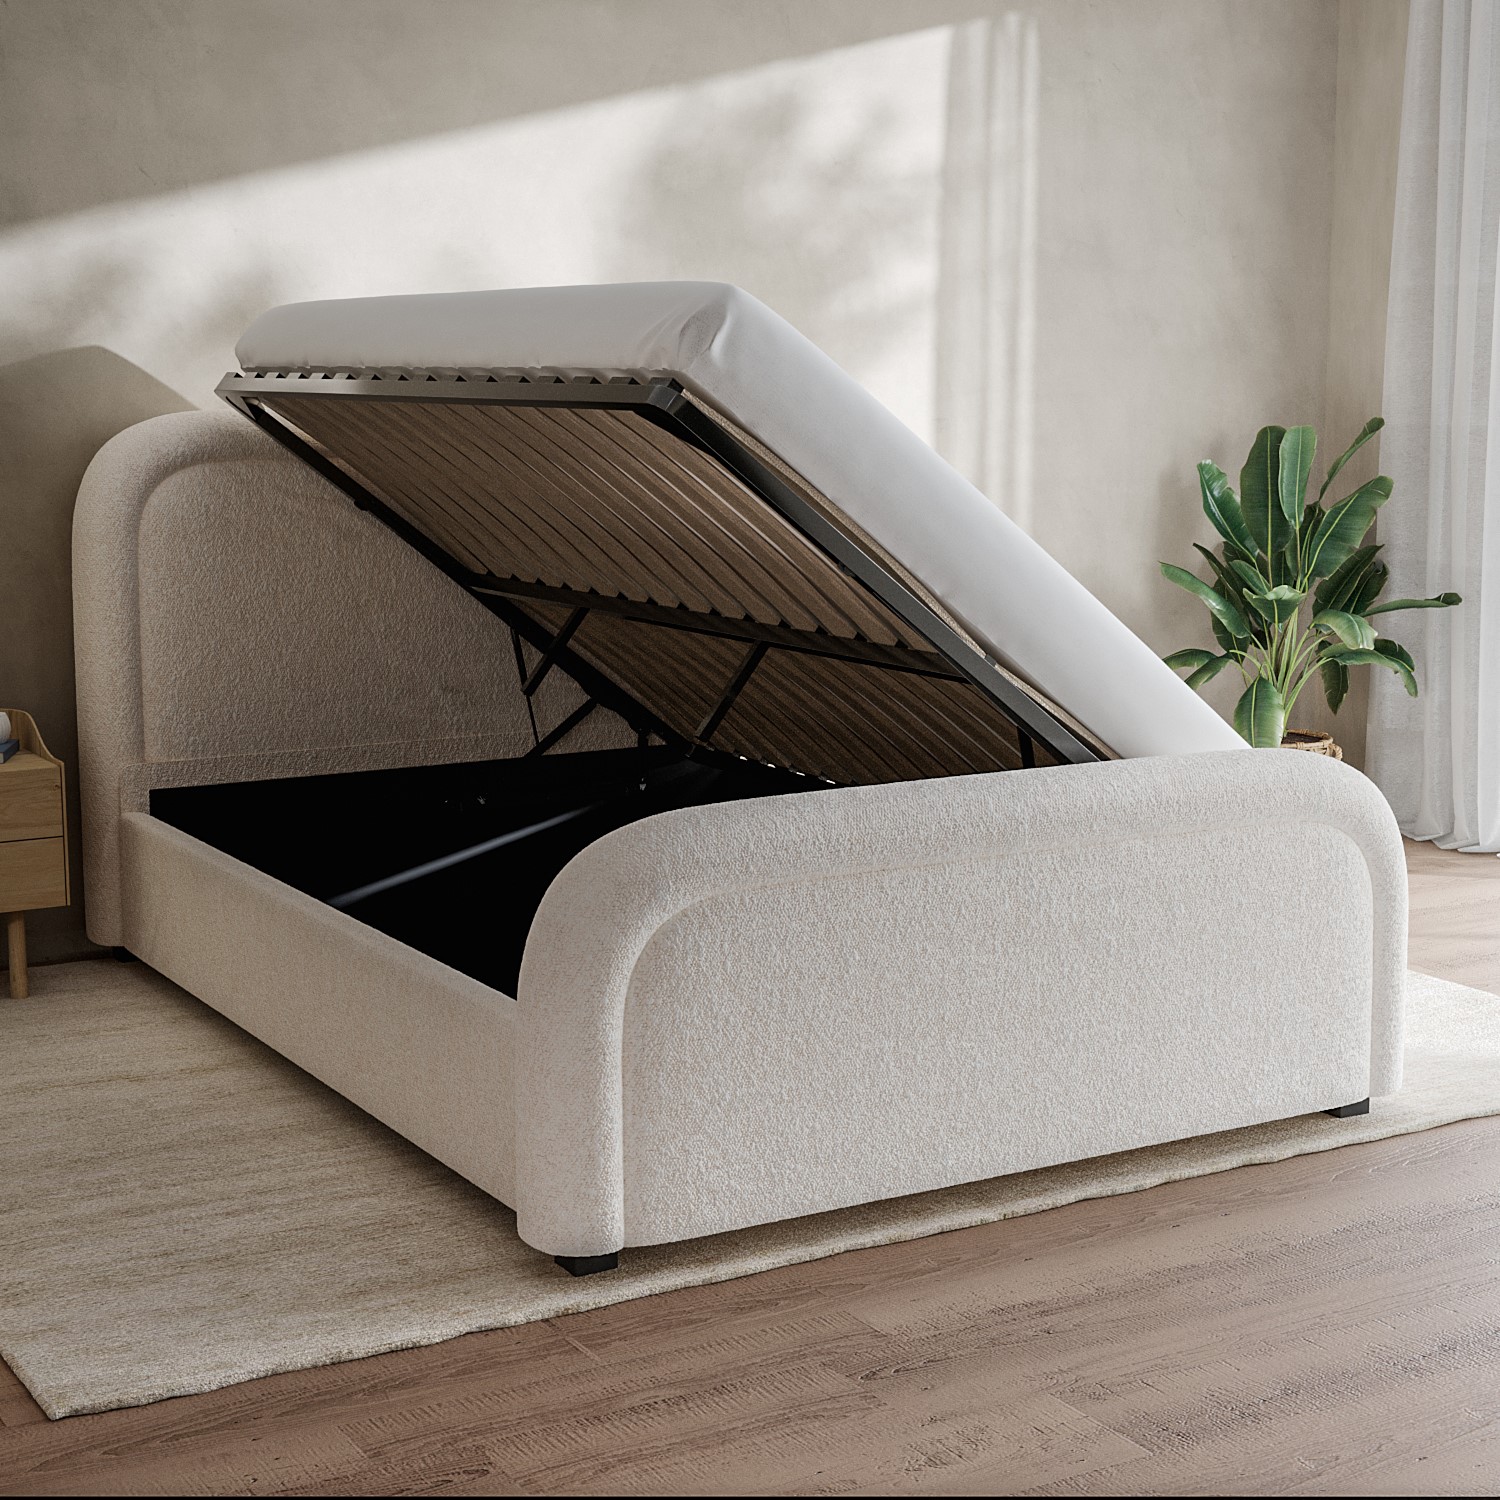 Read more about Off-white boucle king size ottoman bed with curved headboard naomi